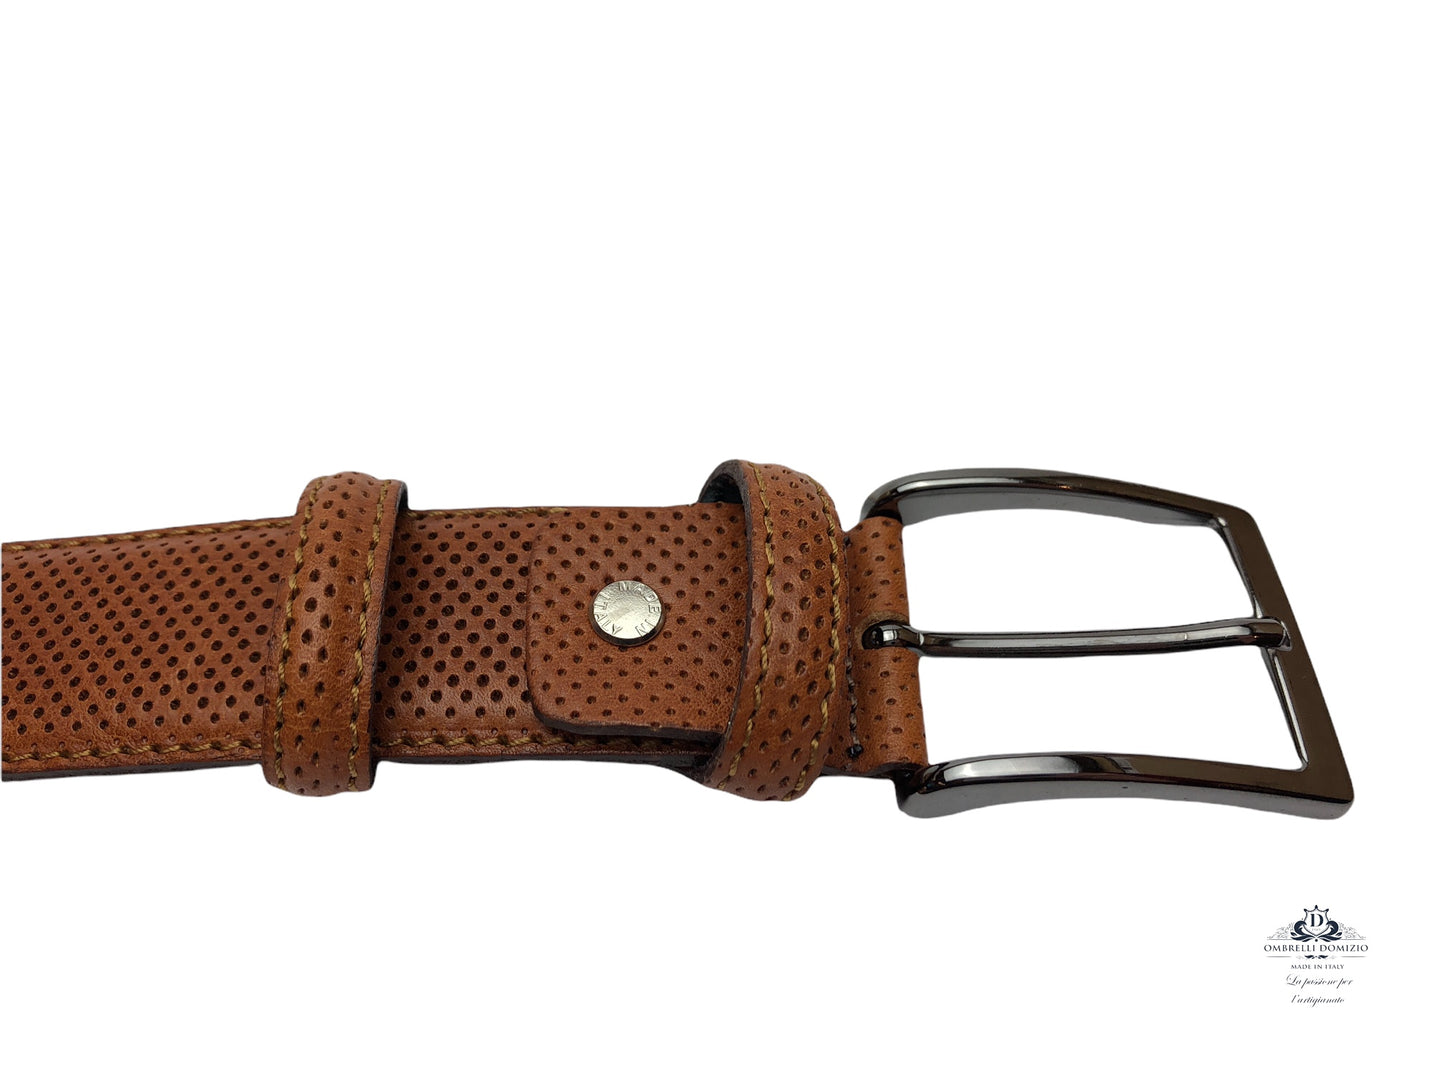 Pressed leather belt Honeycomb col. Artisanal Made in Italy leather